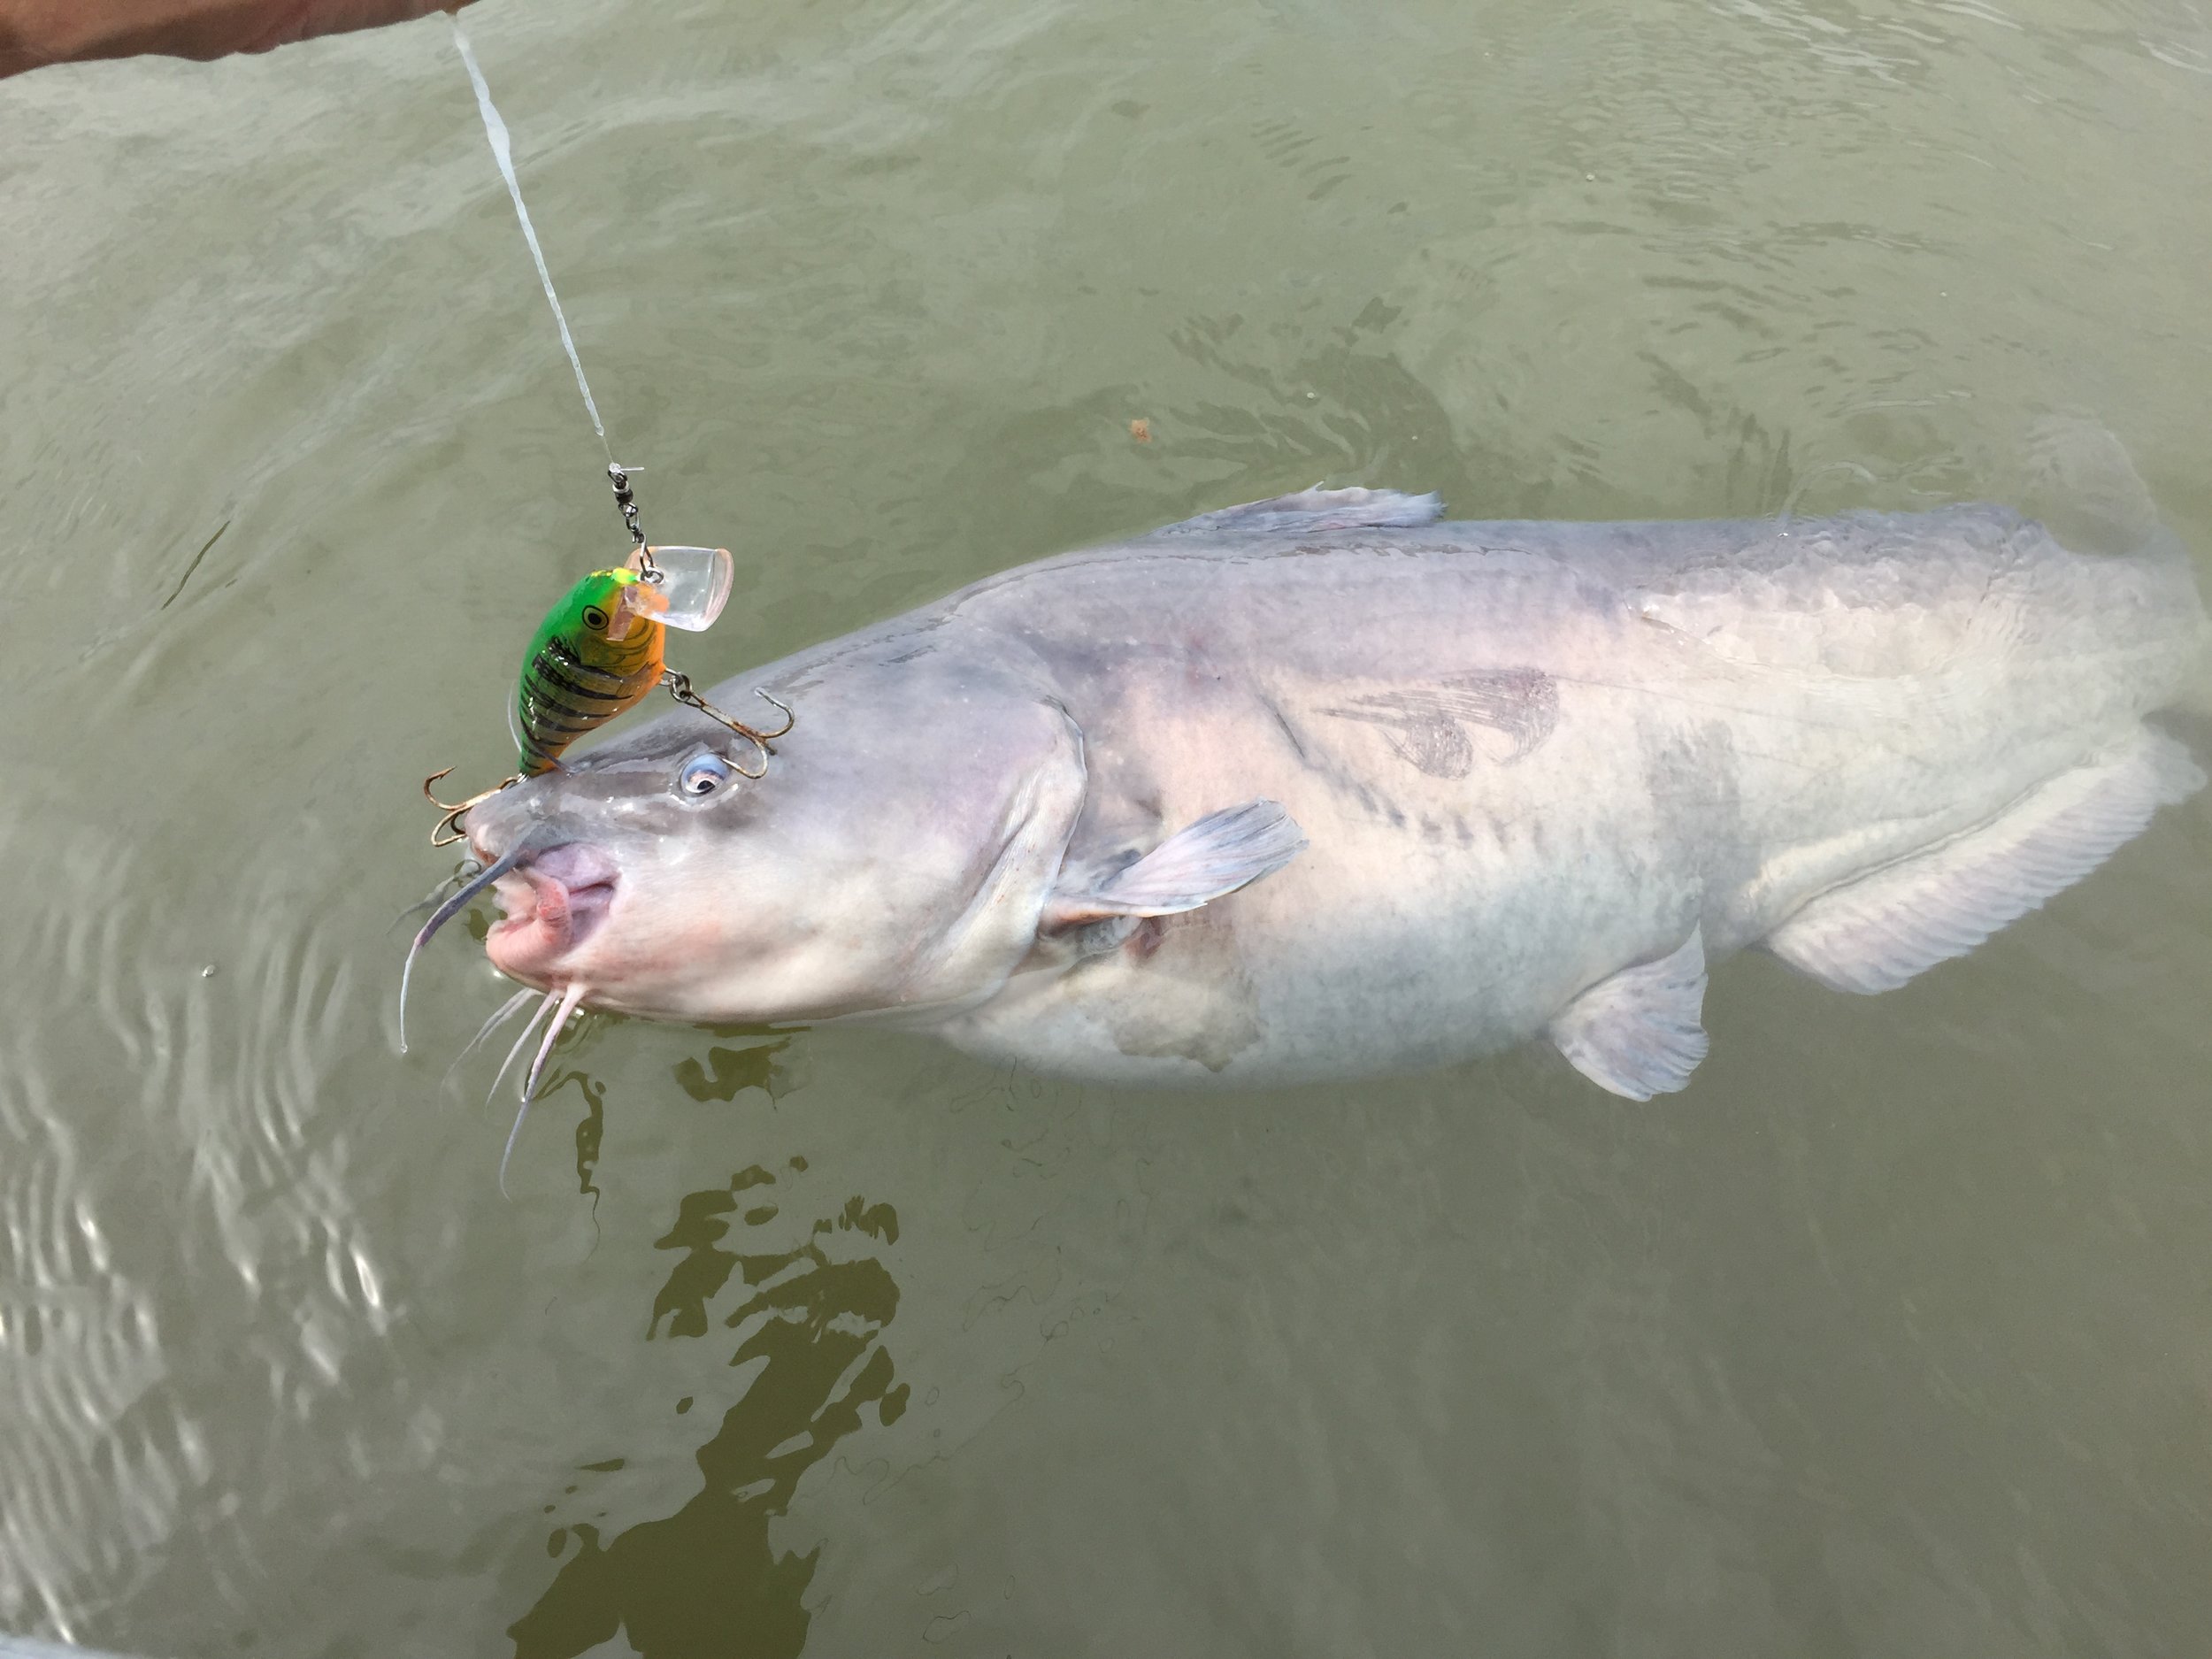 Fly Fishing in Greater Washington DC Area - National Capital